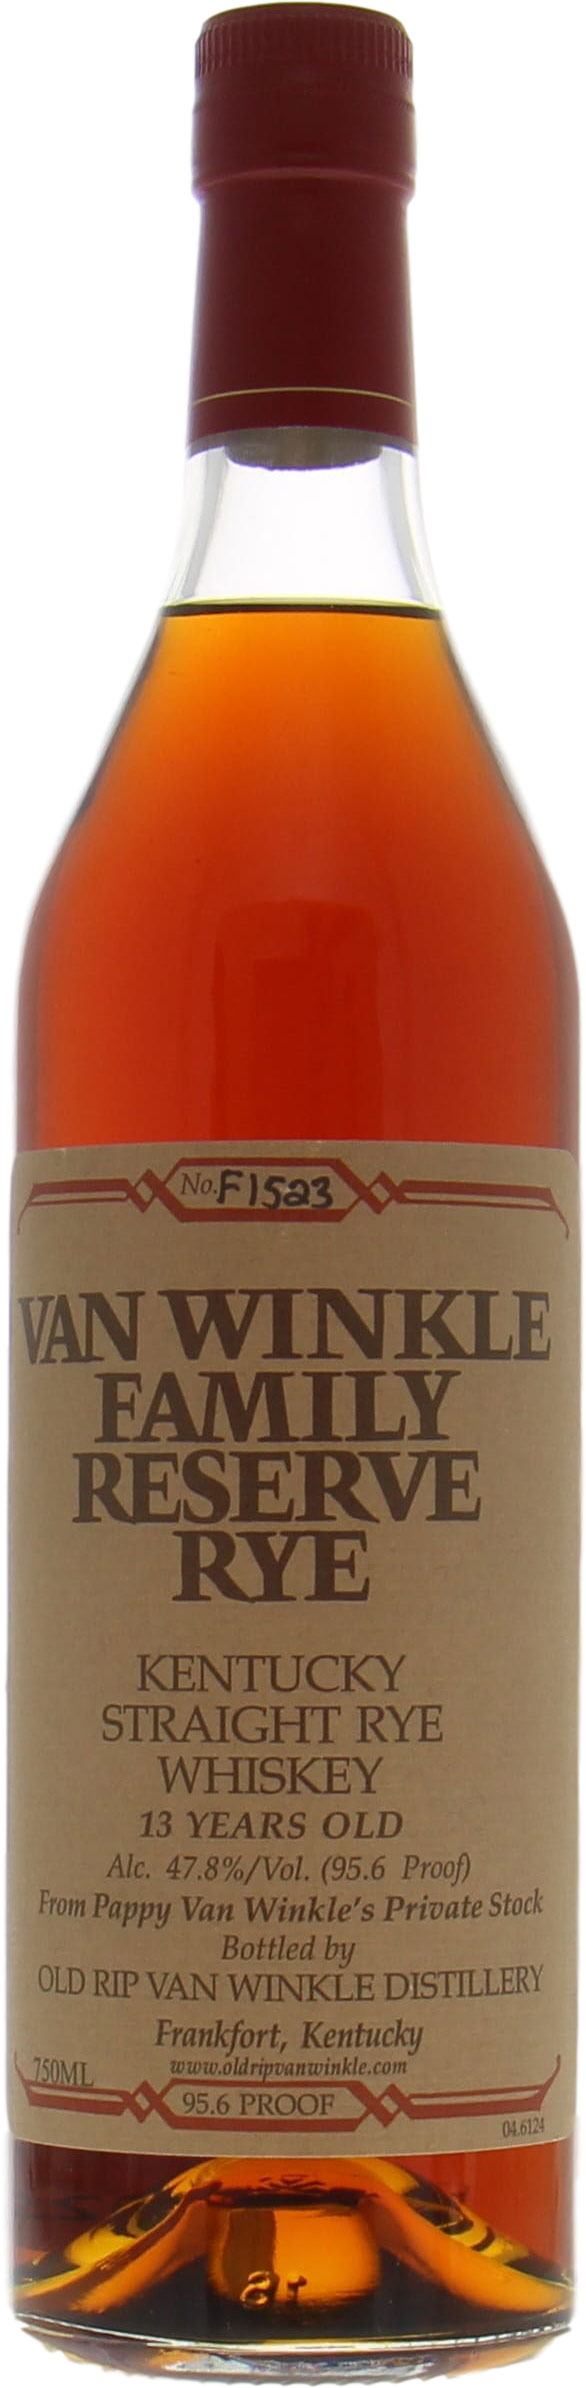 Van Winkle - Rye 13 Years Old Family Reserve No. F1523 95.6 Proof 47.8% NV Perfect